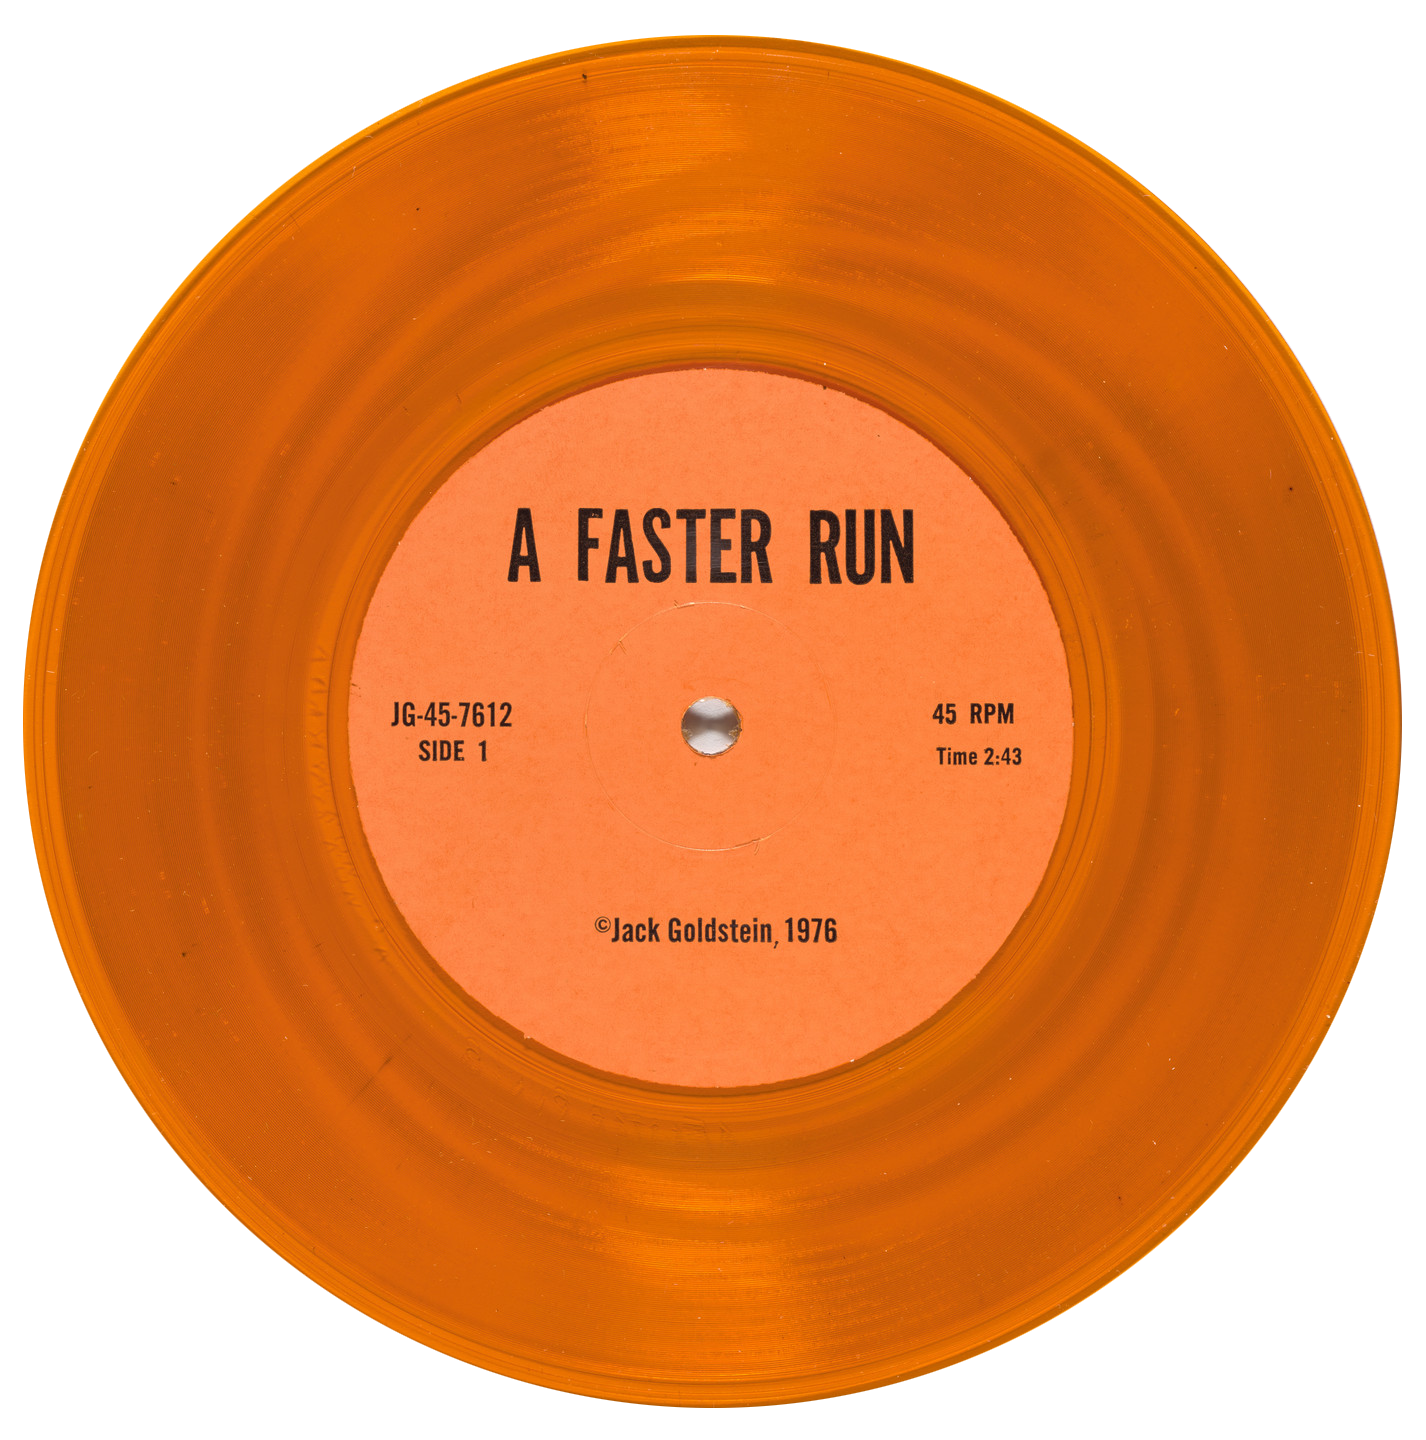  A FASTER RUN
Orange vinyl - 45 rpm 7-inch record

A Faster Run is one of the nine components of :
A Suite of Nine 45 rpm 7-Inch Records with Sound Effects
1976